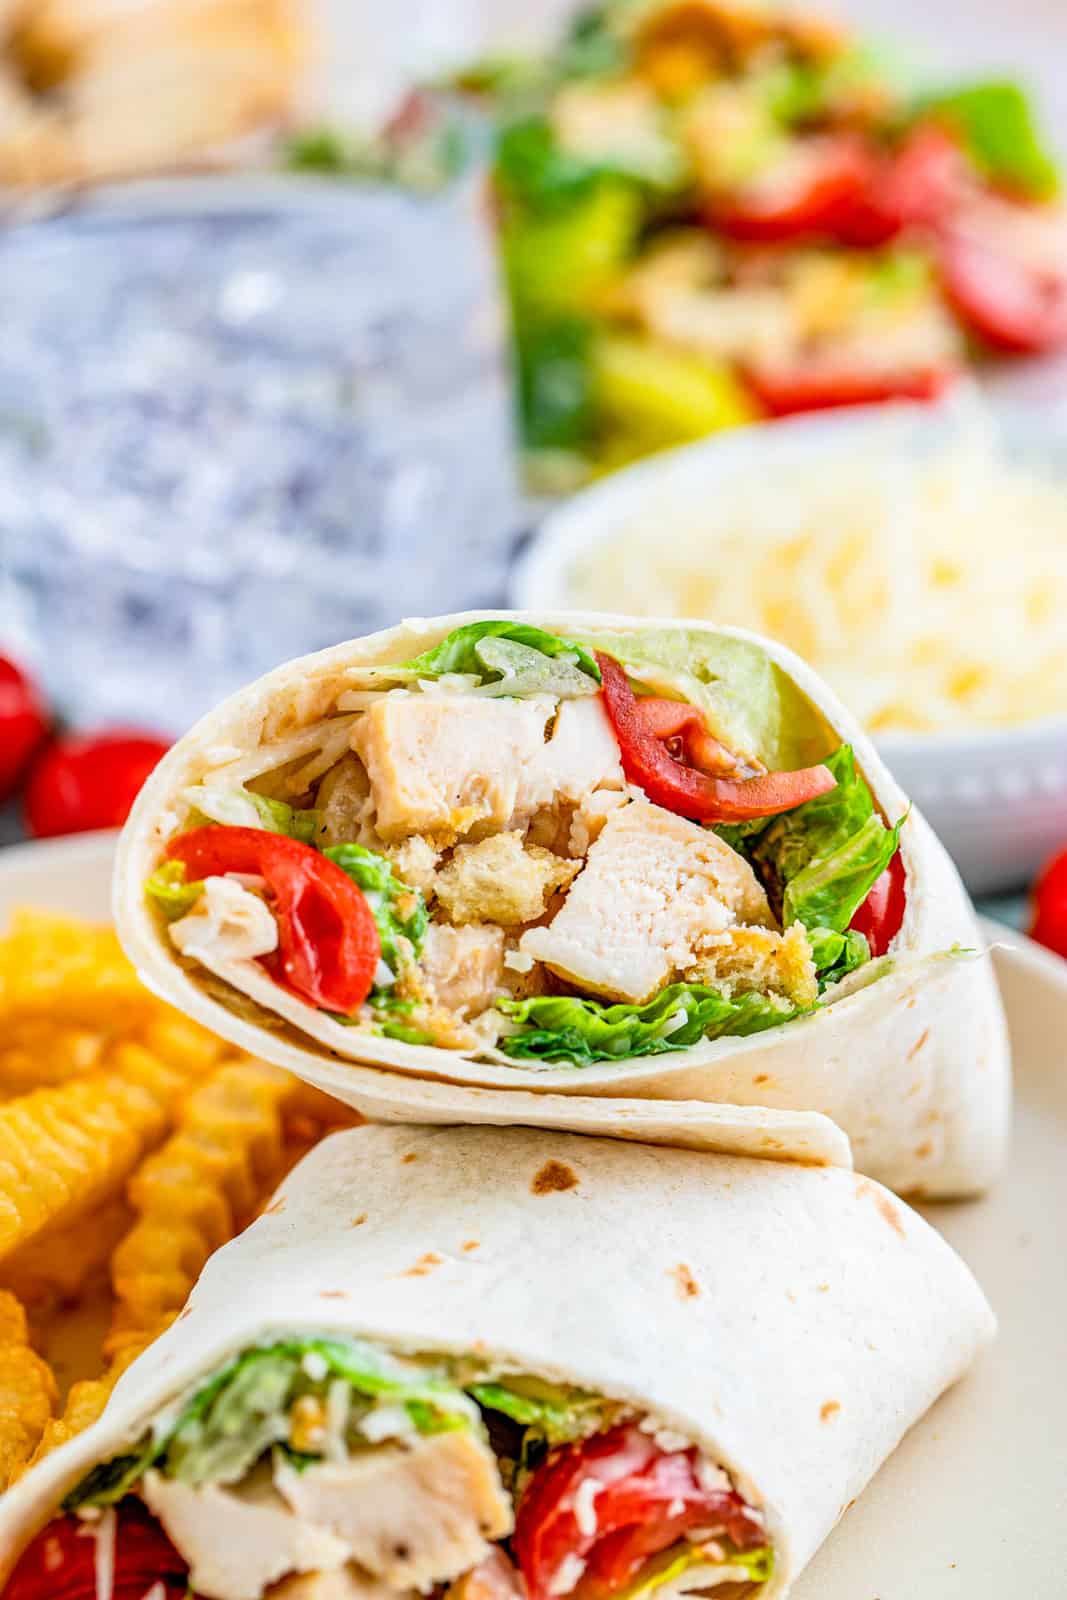 Chicken Caesar Wraps cut in half with one showing ingredients inside.